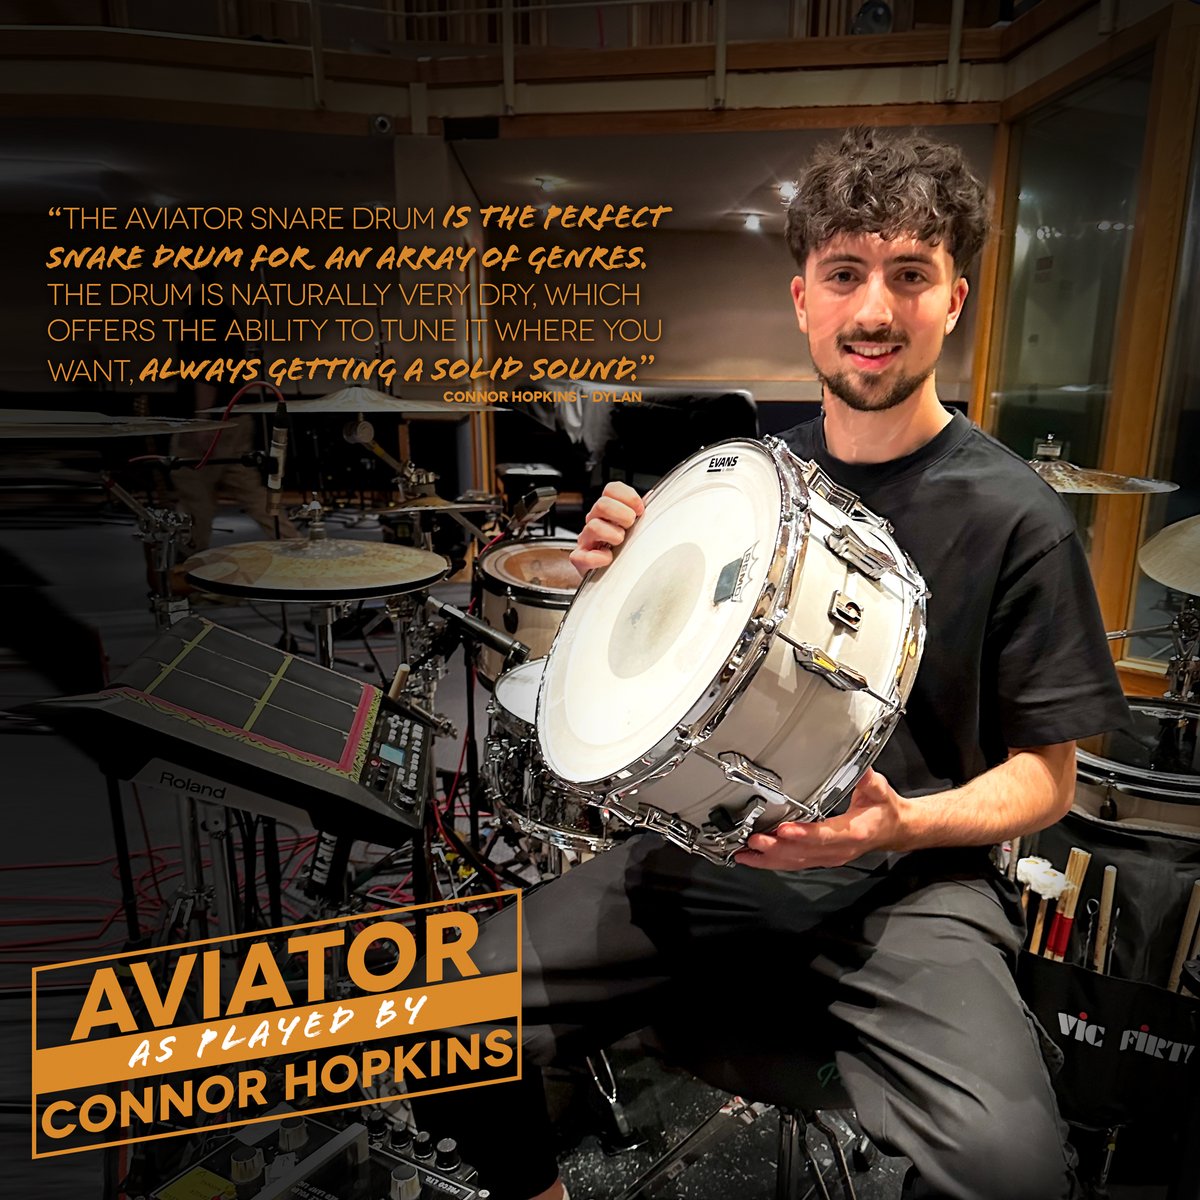 Around the world and back again, Connor Hopkins is back home on UK soil he’s pictured here last week at the BBC Maida Vale studios recording for a Radio 1 performance.   Connor: “I would highly recommend the snare drum to all drummers!”. #britishdrumco #aviator #DYLAN @dyl_an